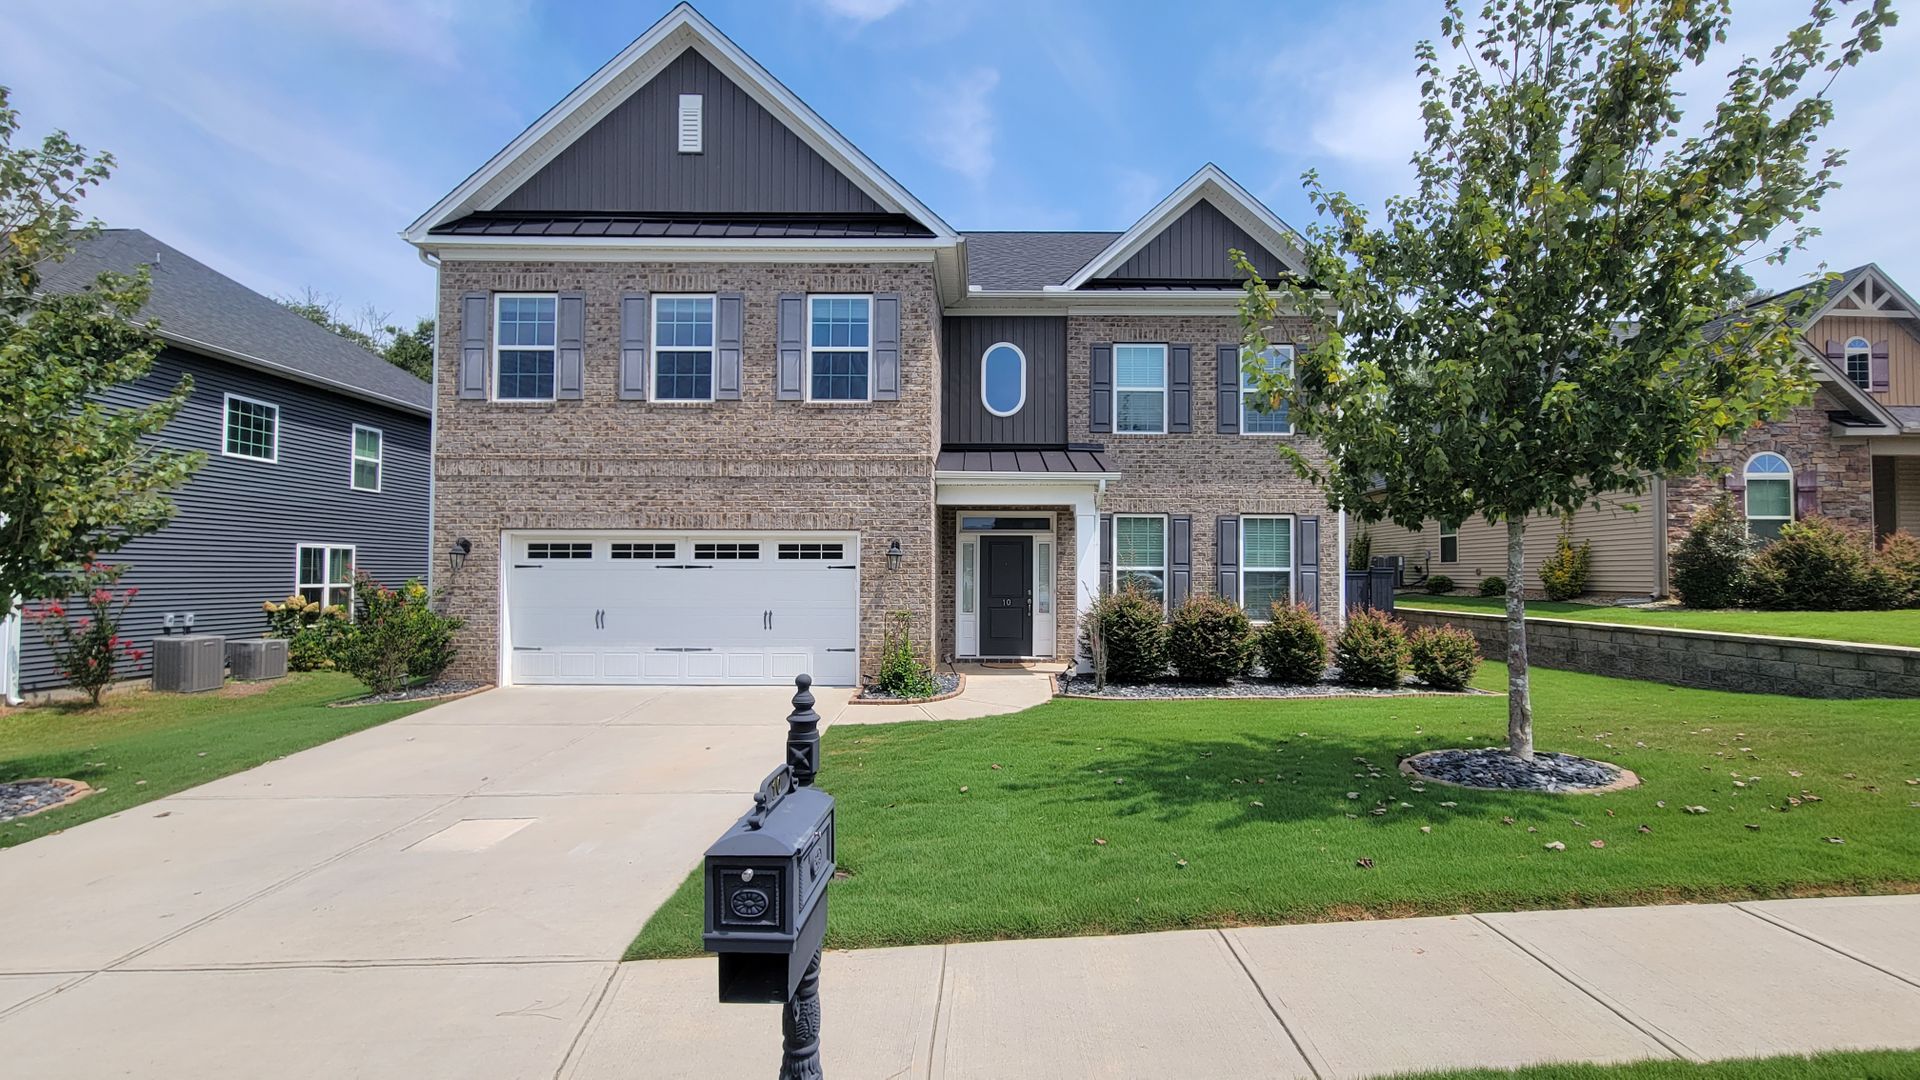 4 Bed, 2.5 Bath Home in Simpsonville Available